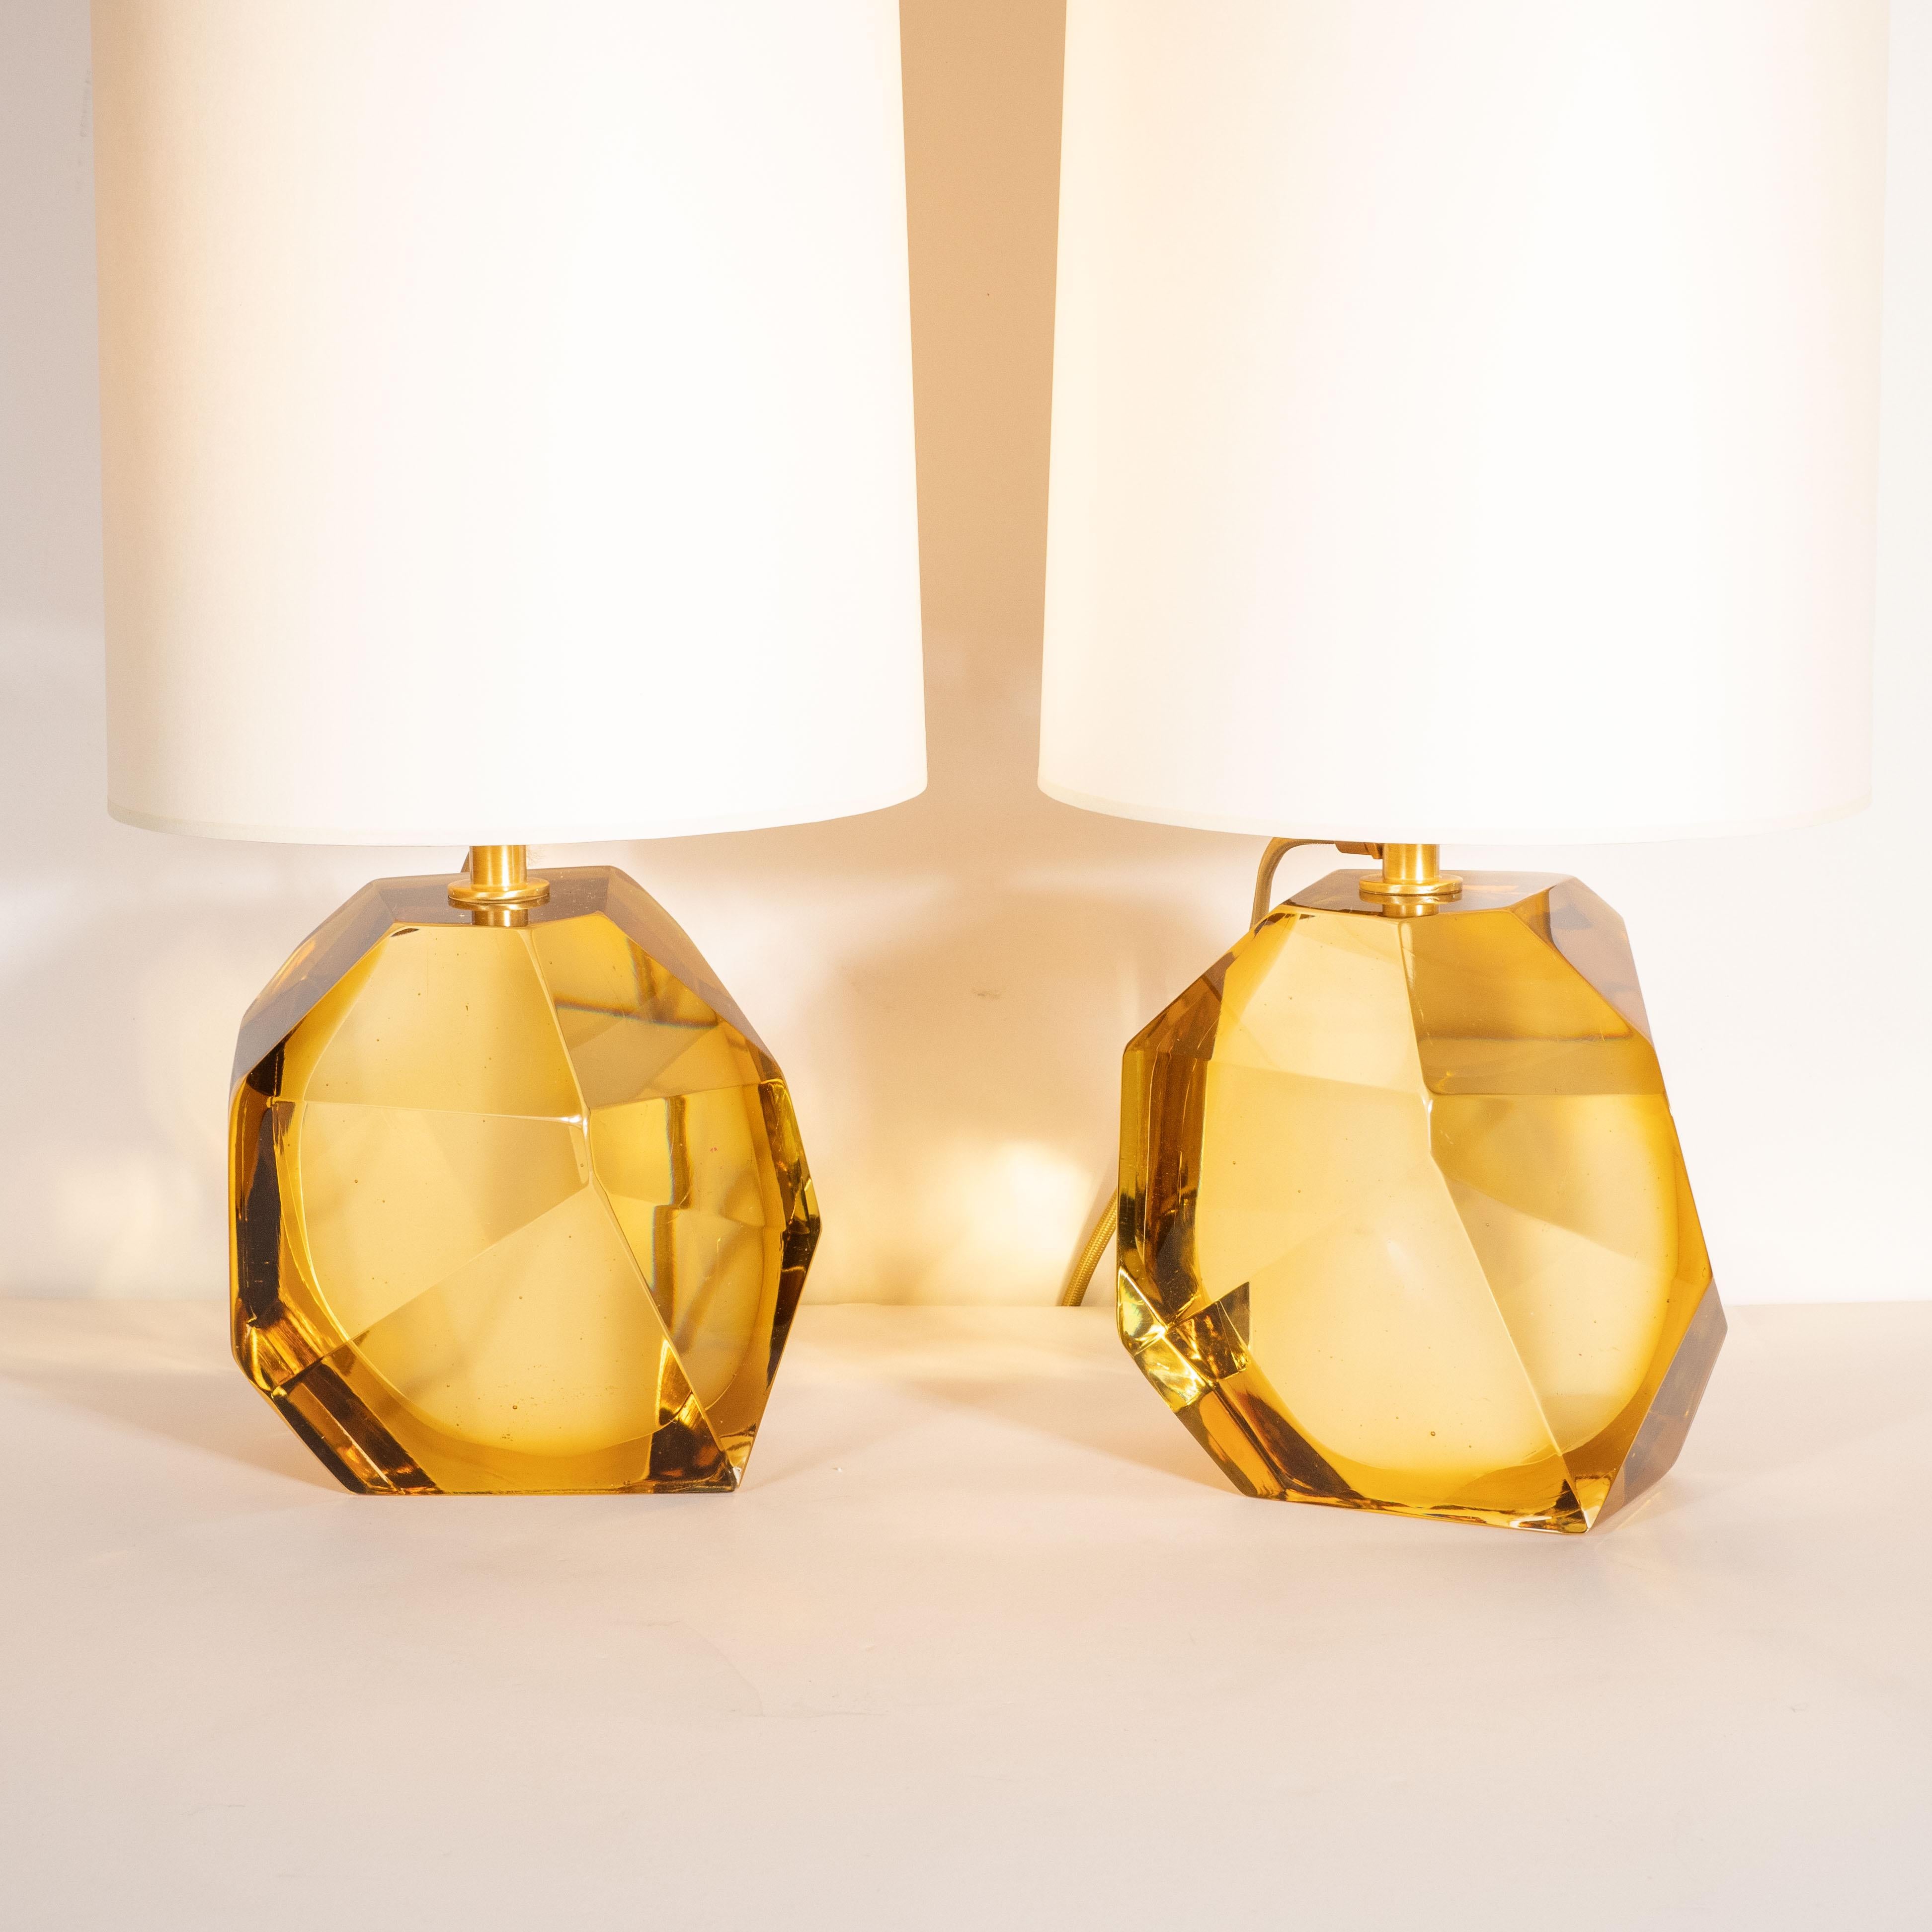 Contemporary Modernist Faceted Handblown Murano Topaz Glass Table Lamps